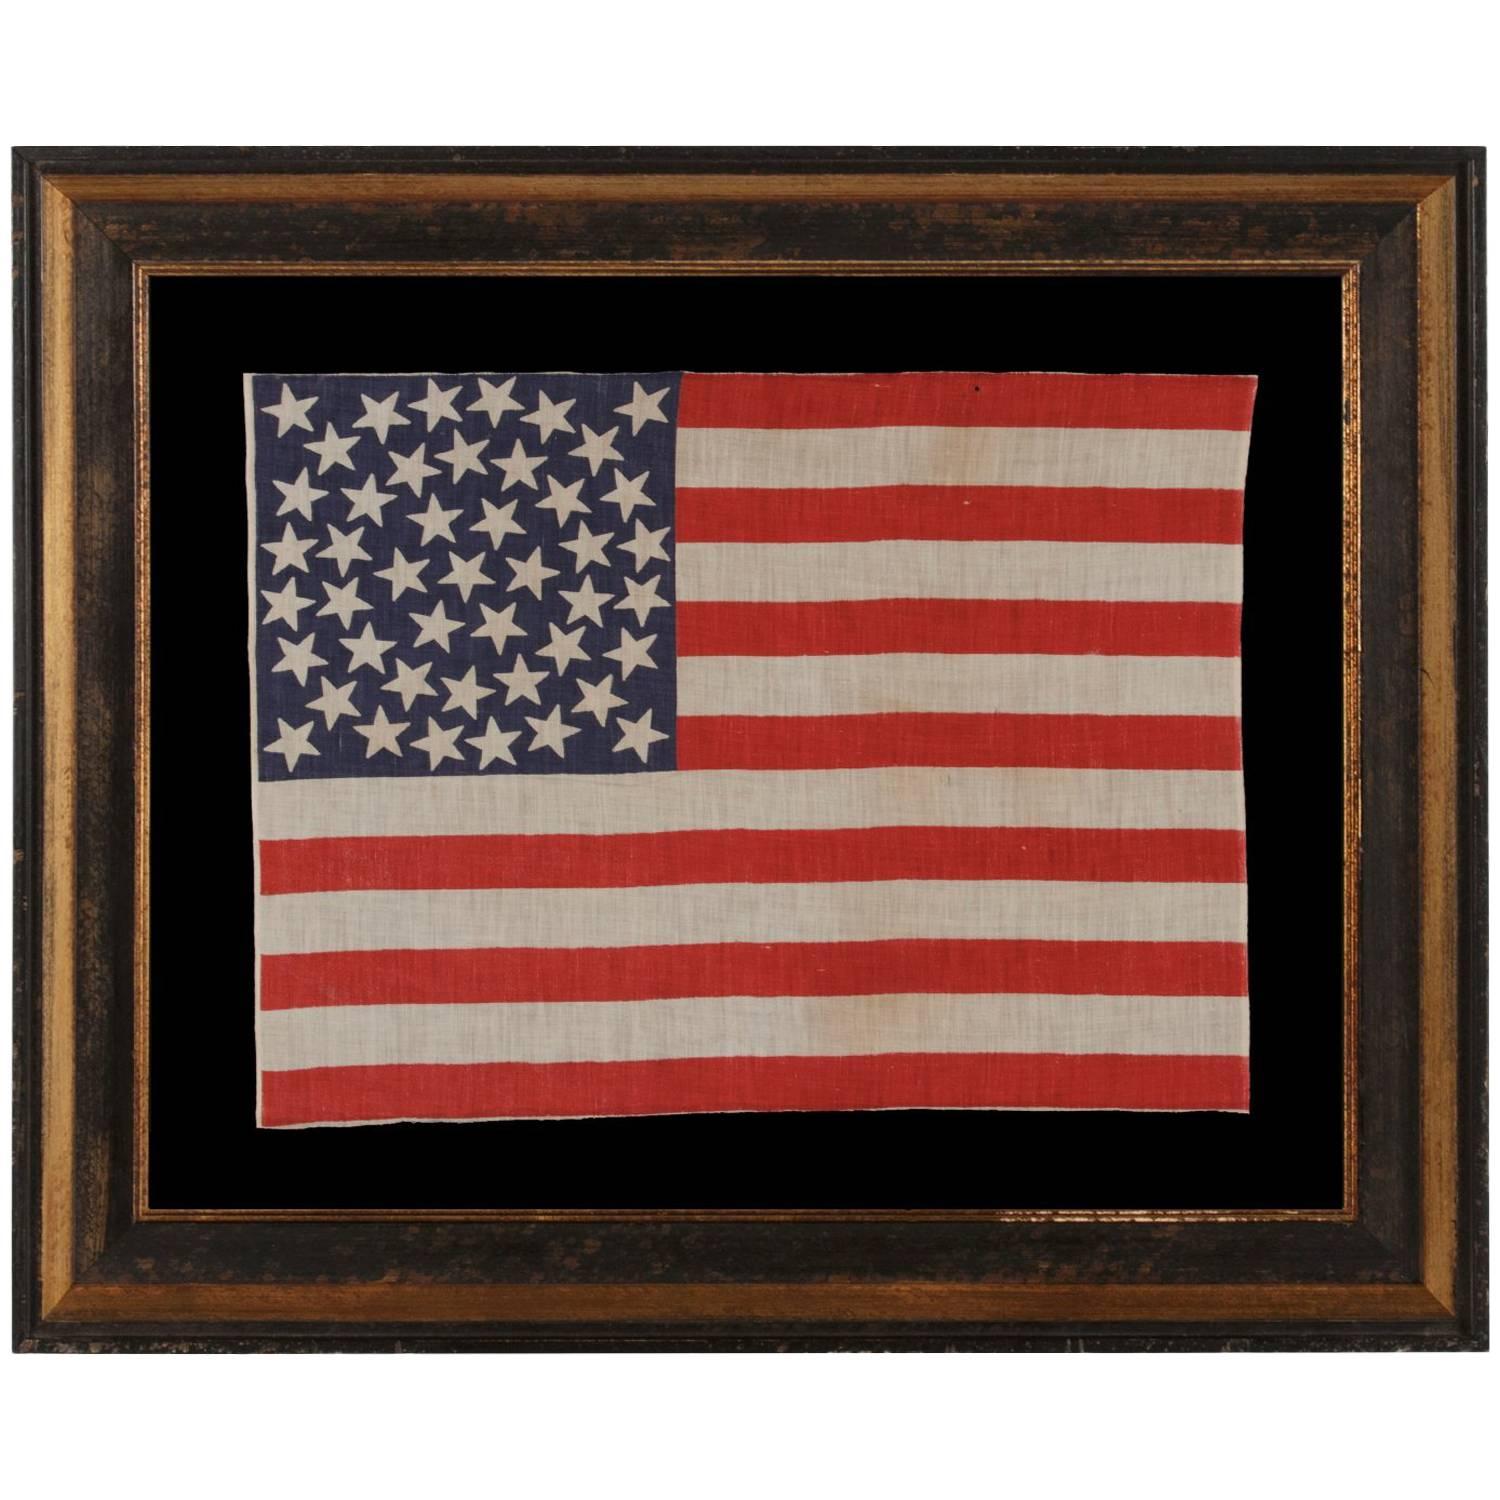 45 Stars on an Antique American Parade Flag with a Medallion Configuration